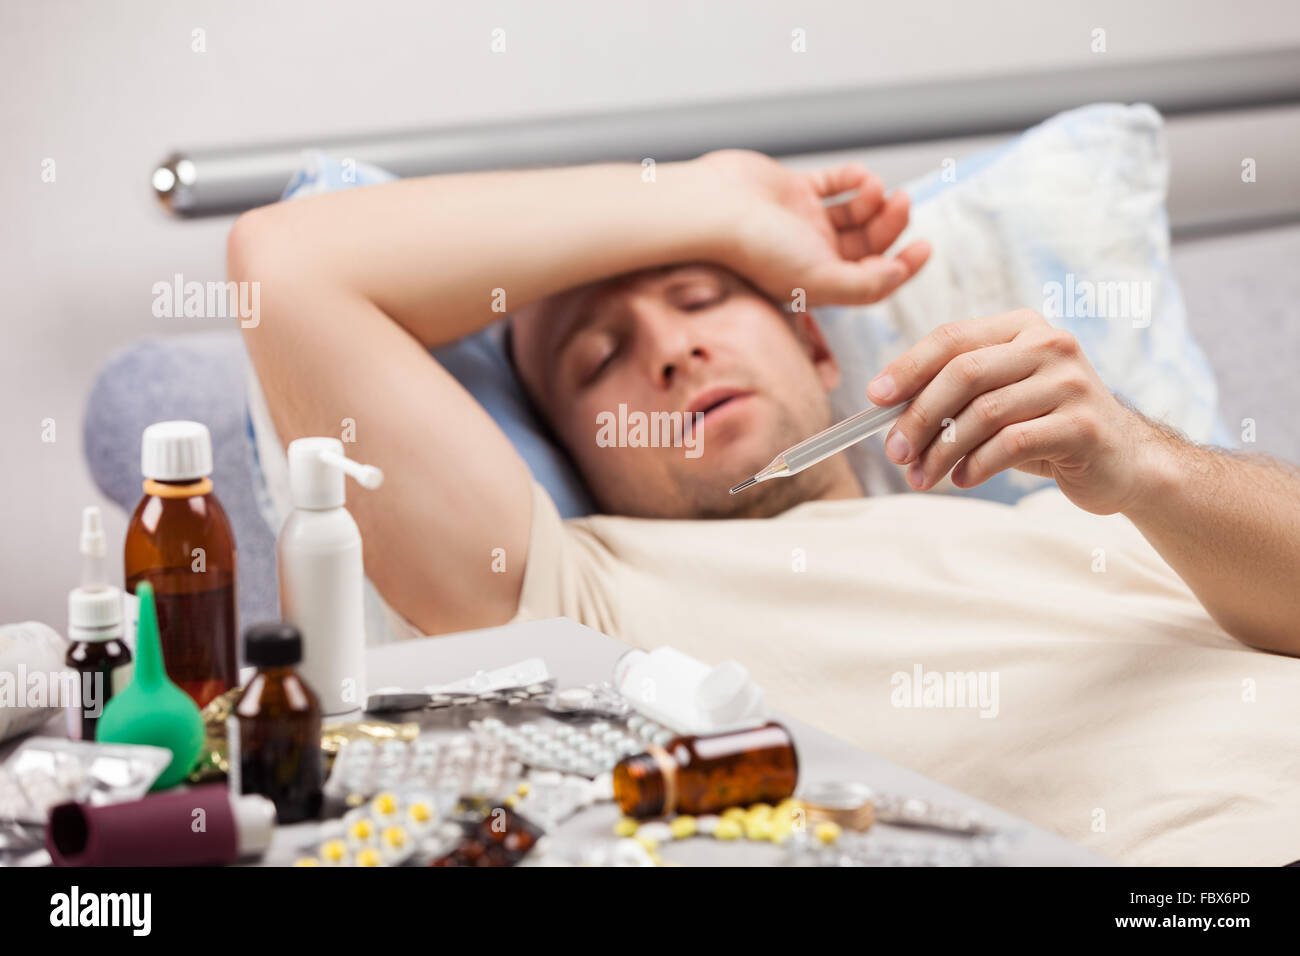 Unwell man patient lying down bed Stock Photo